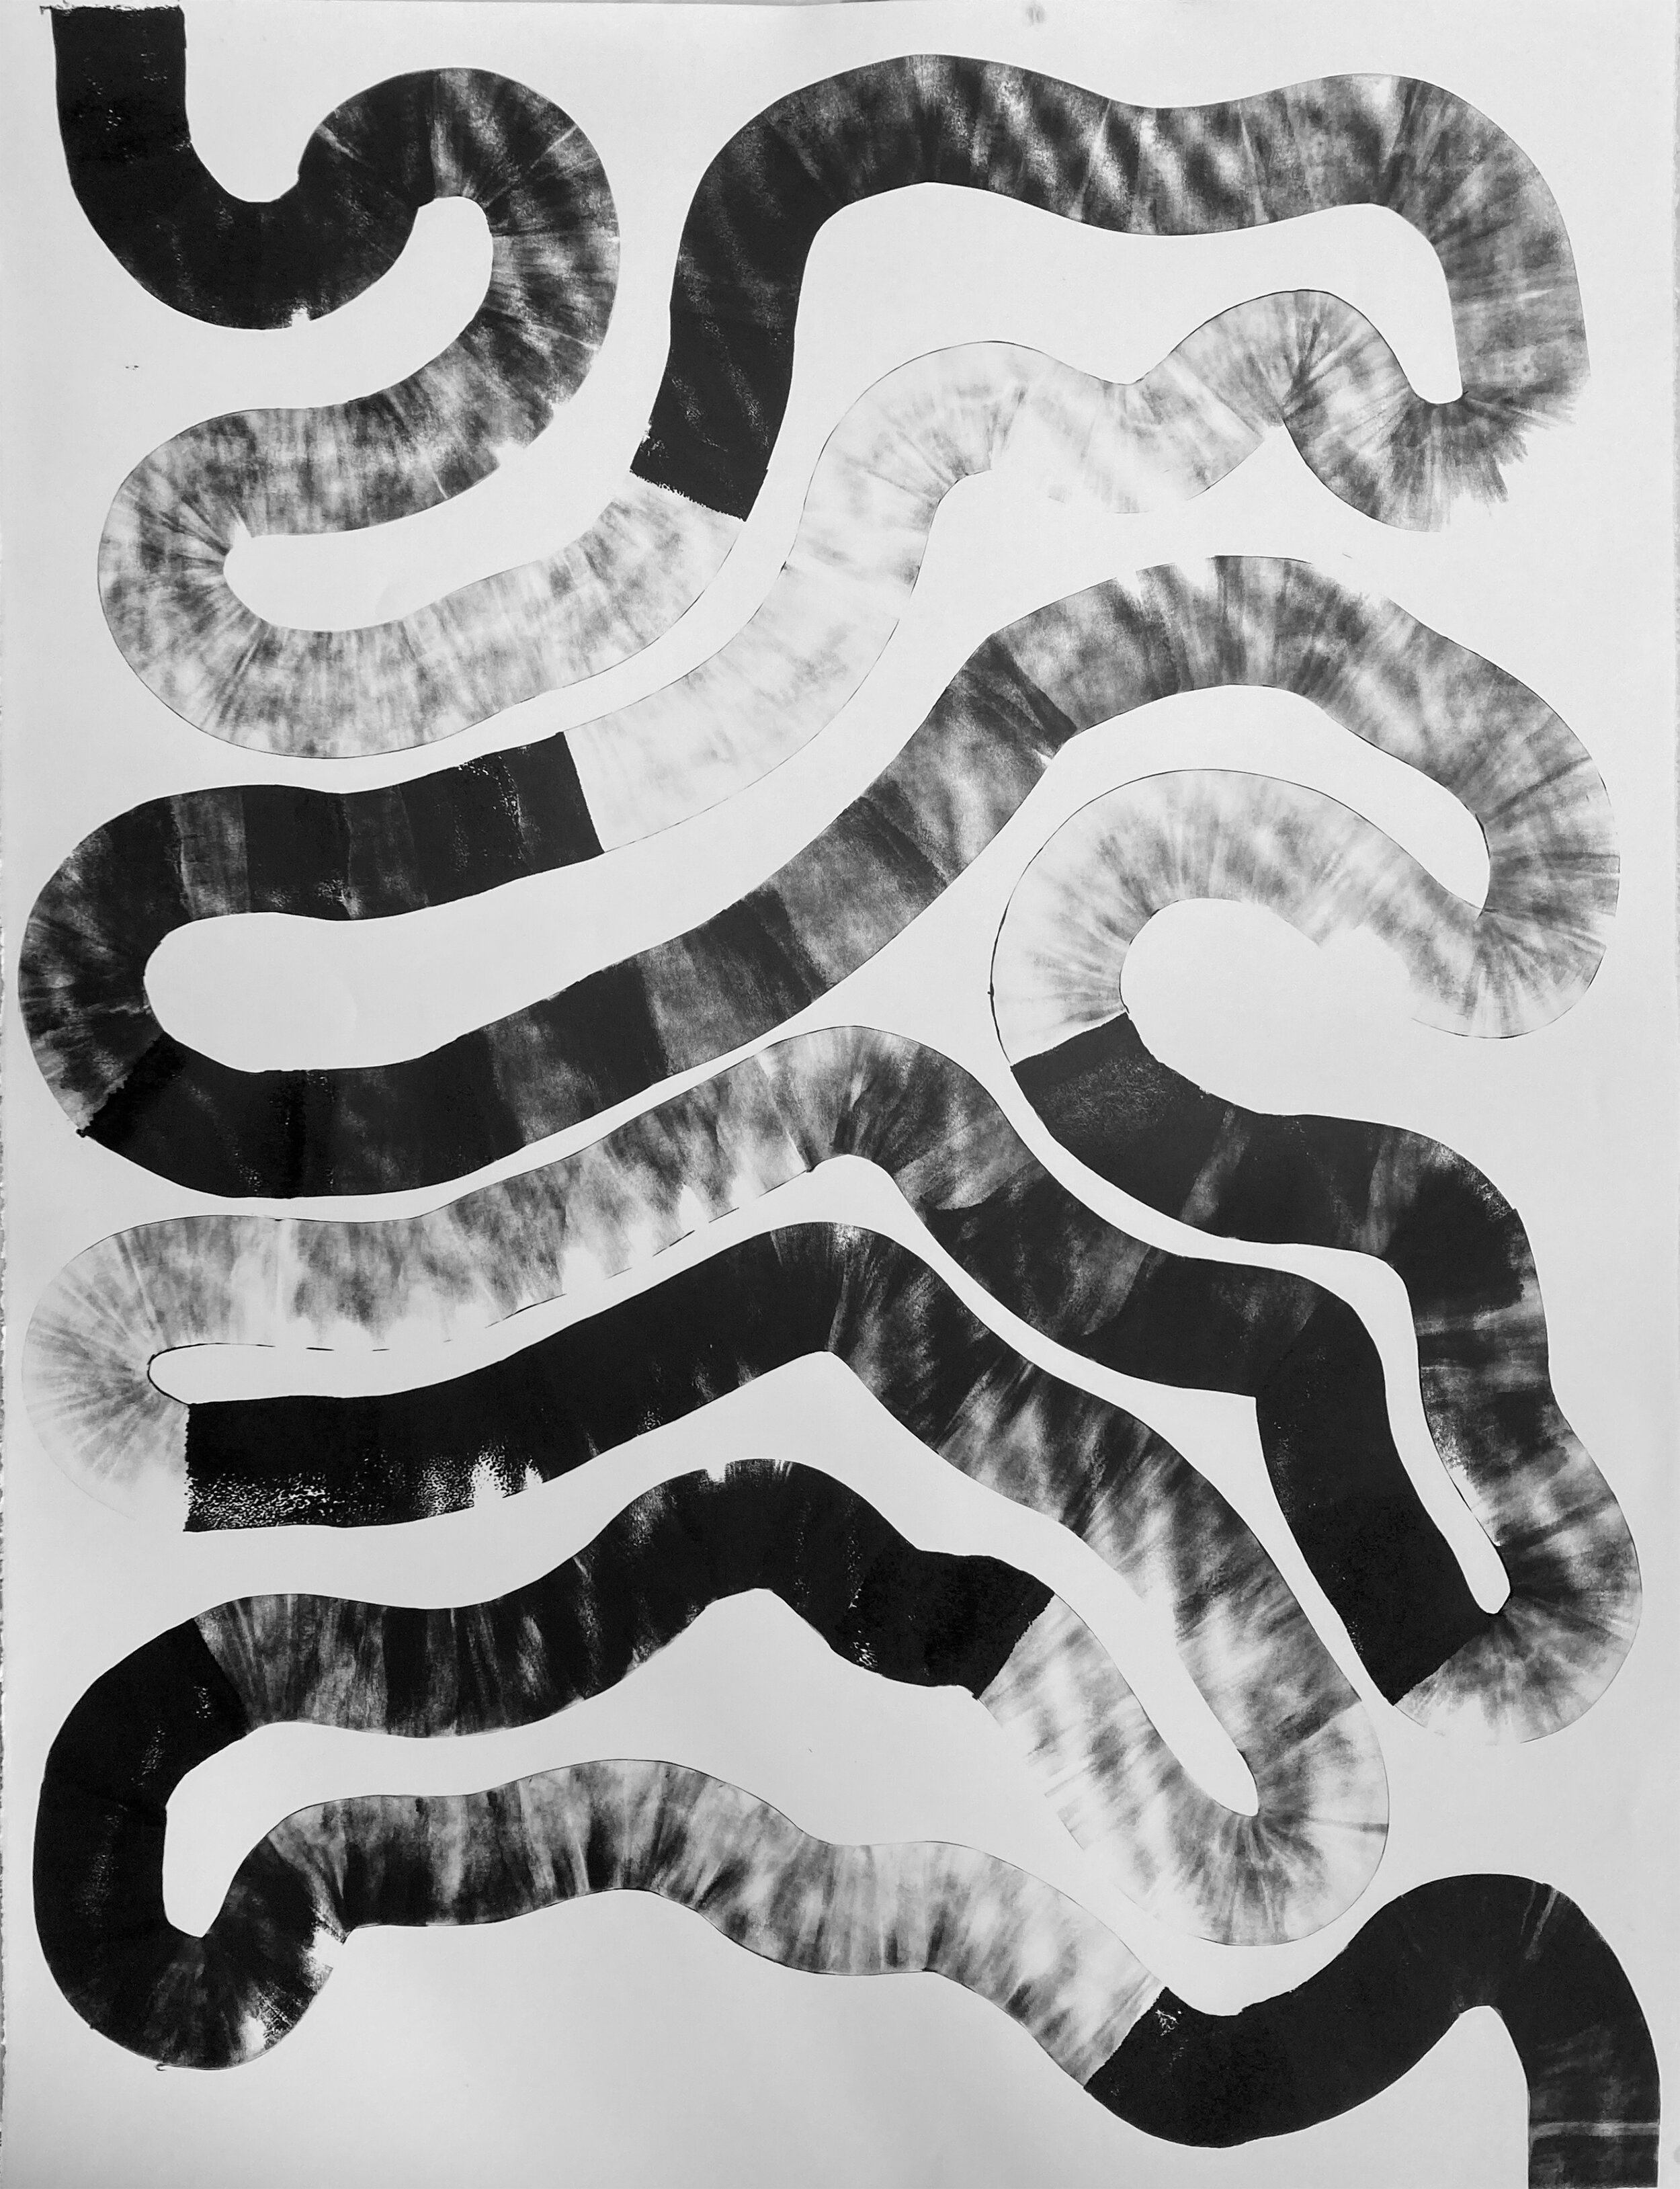  Rattler, 2021, Litho ink on paper, 50 x 38 inches (unframed) 